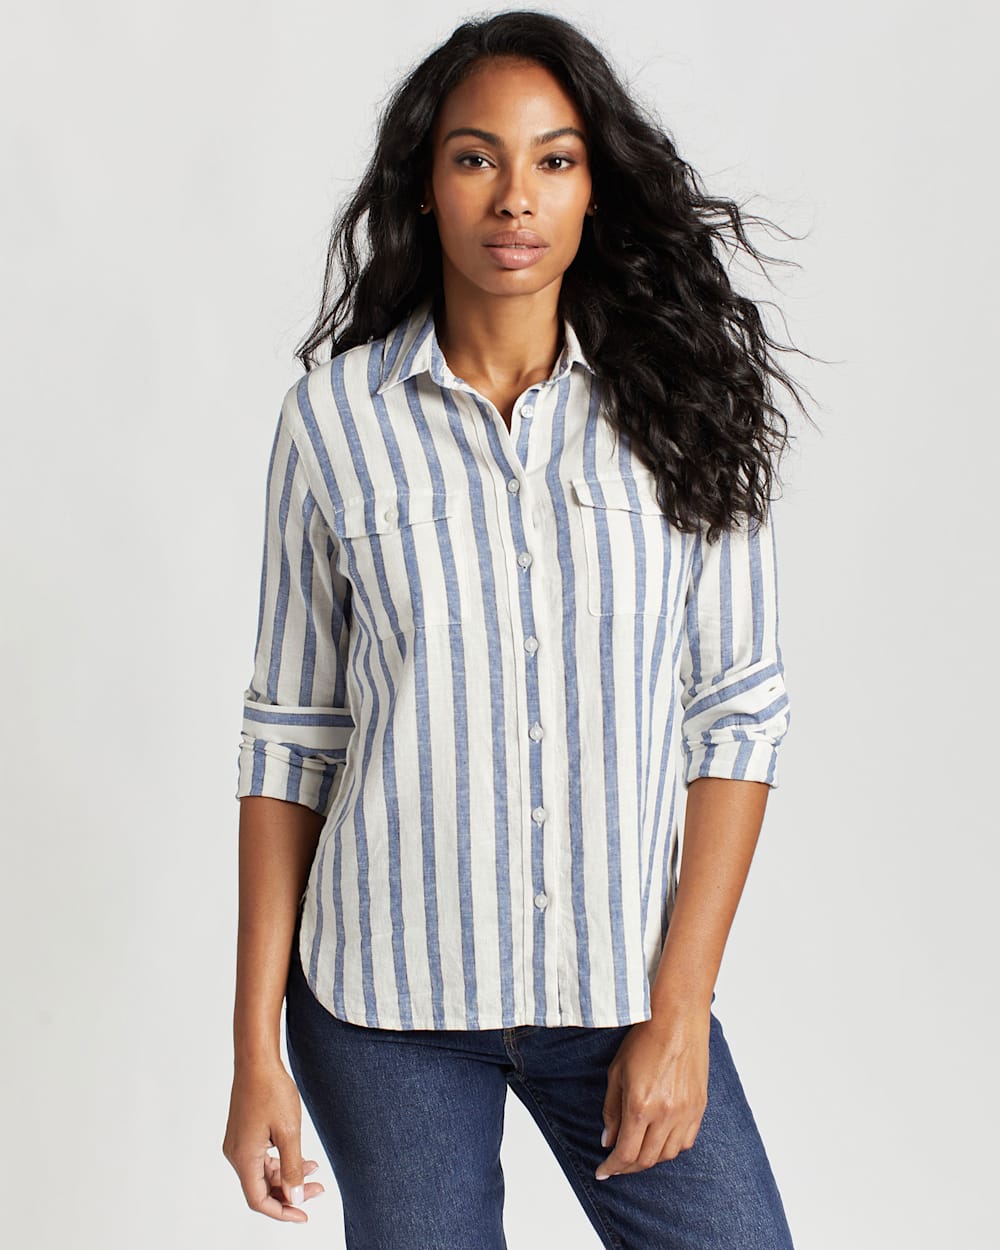 ALTERNATE VIEW OF WOMEN'S LONG-SLEEVE TWO POCKET SHIRT IN BLUE STRIPE image number 6